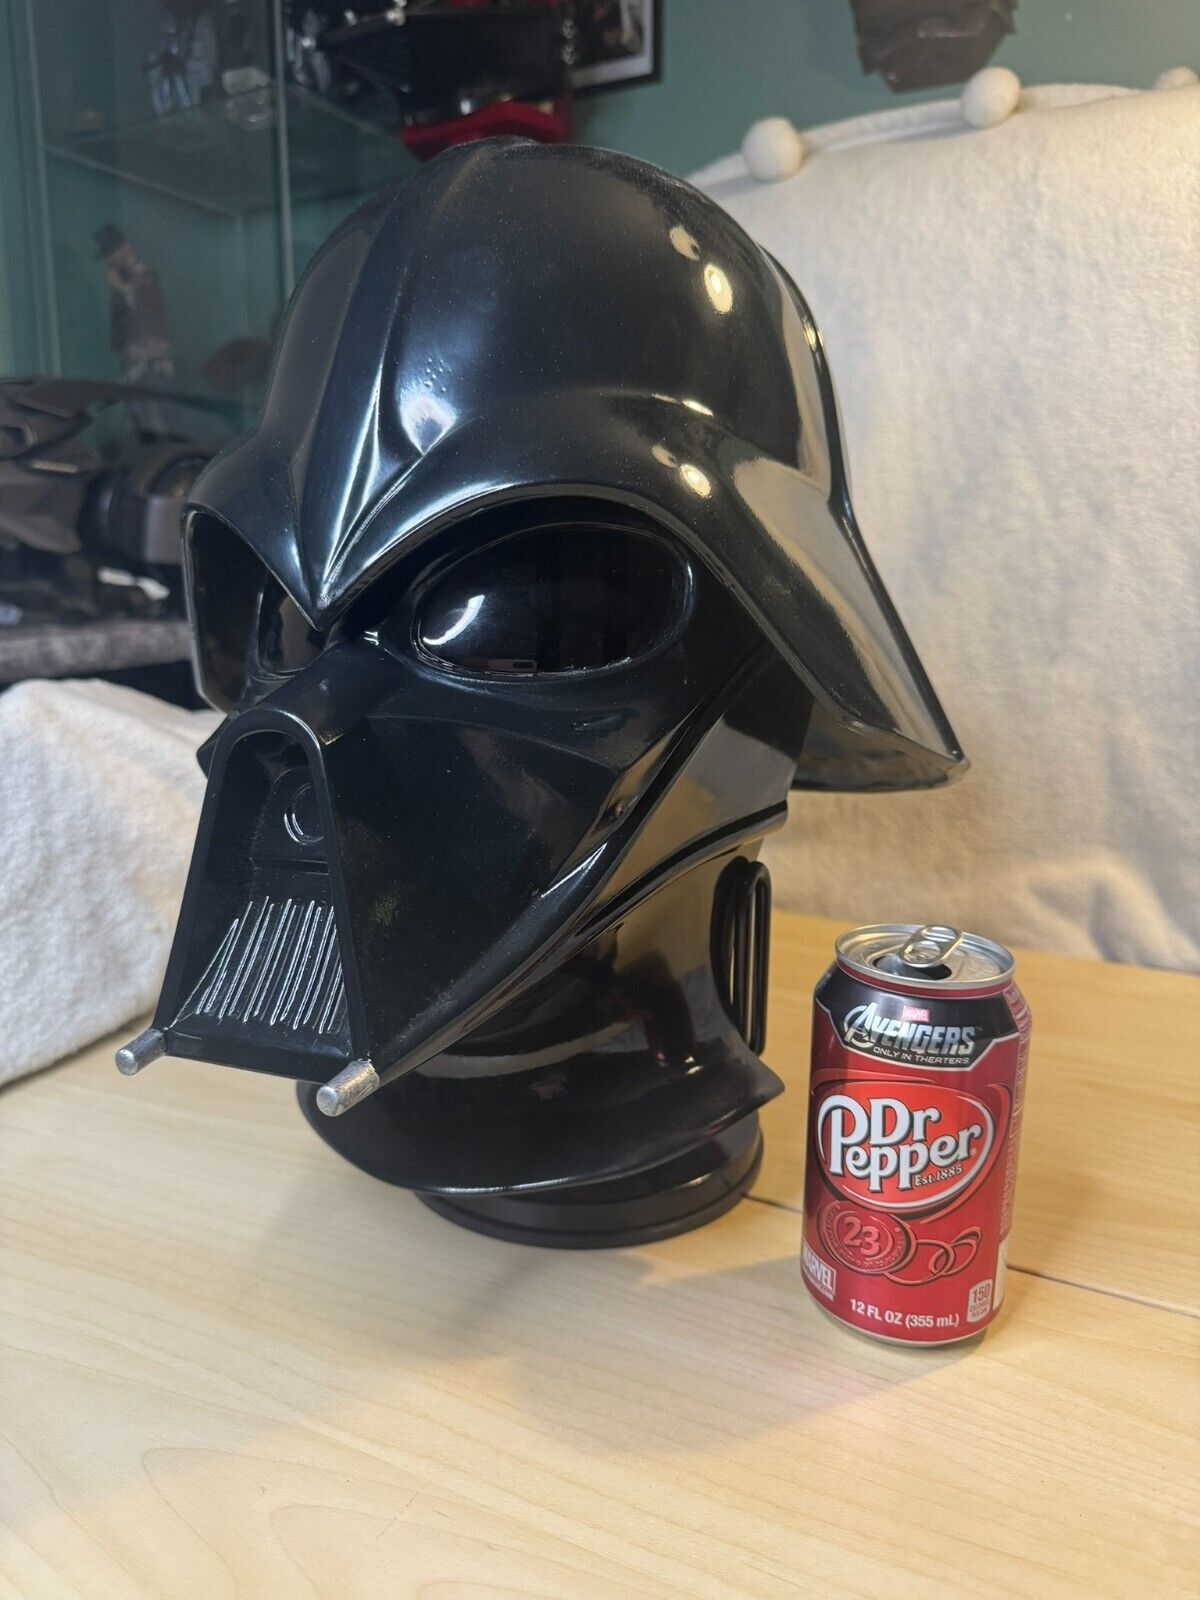 1:1 Life Size STAR WARS DARTH VADER HELMET RALPH MCQUARRIE CONCEPT By Reelprops